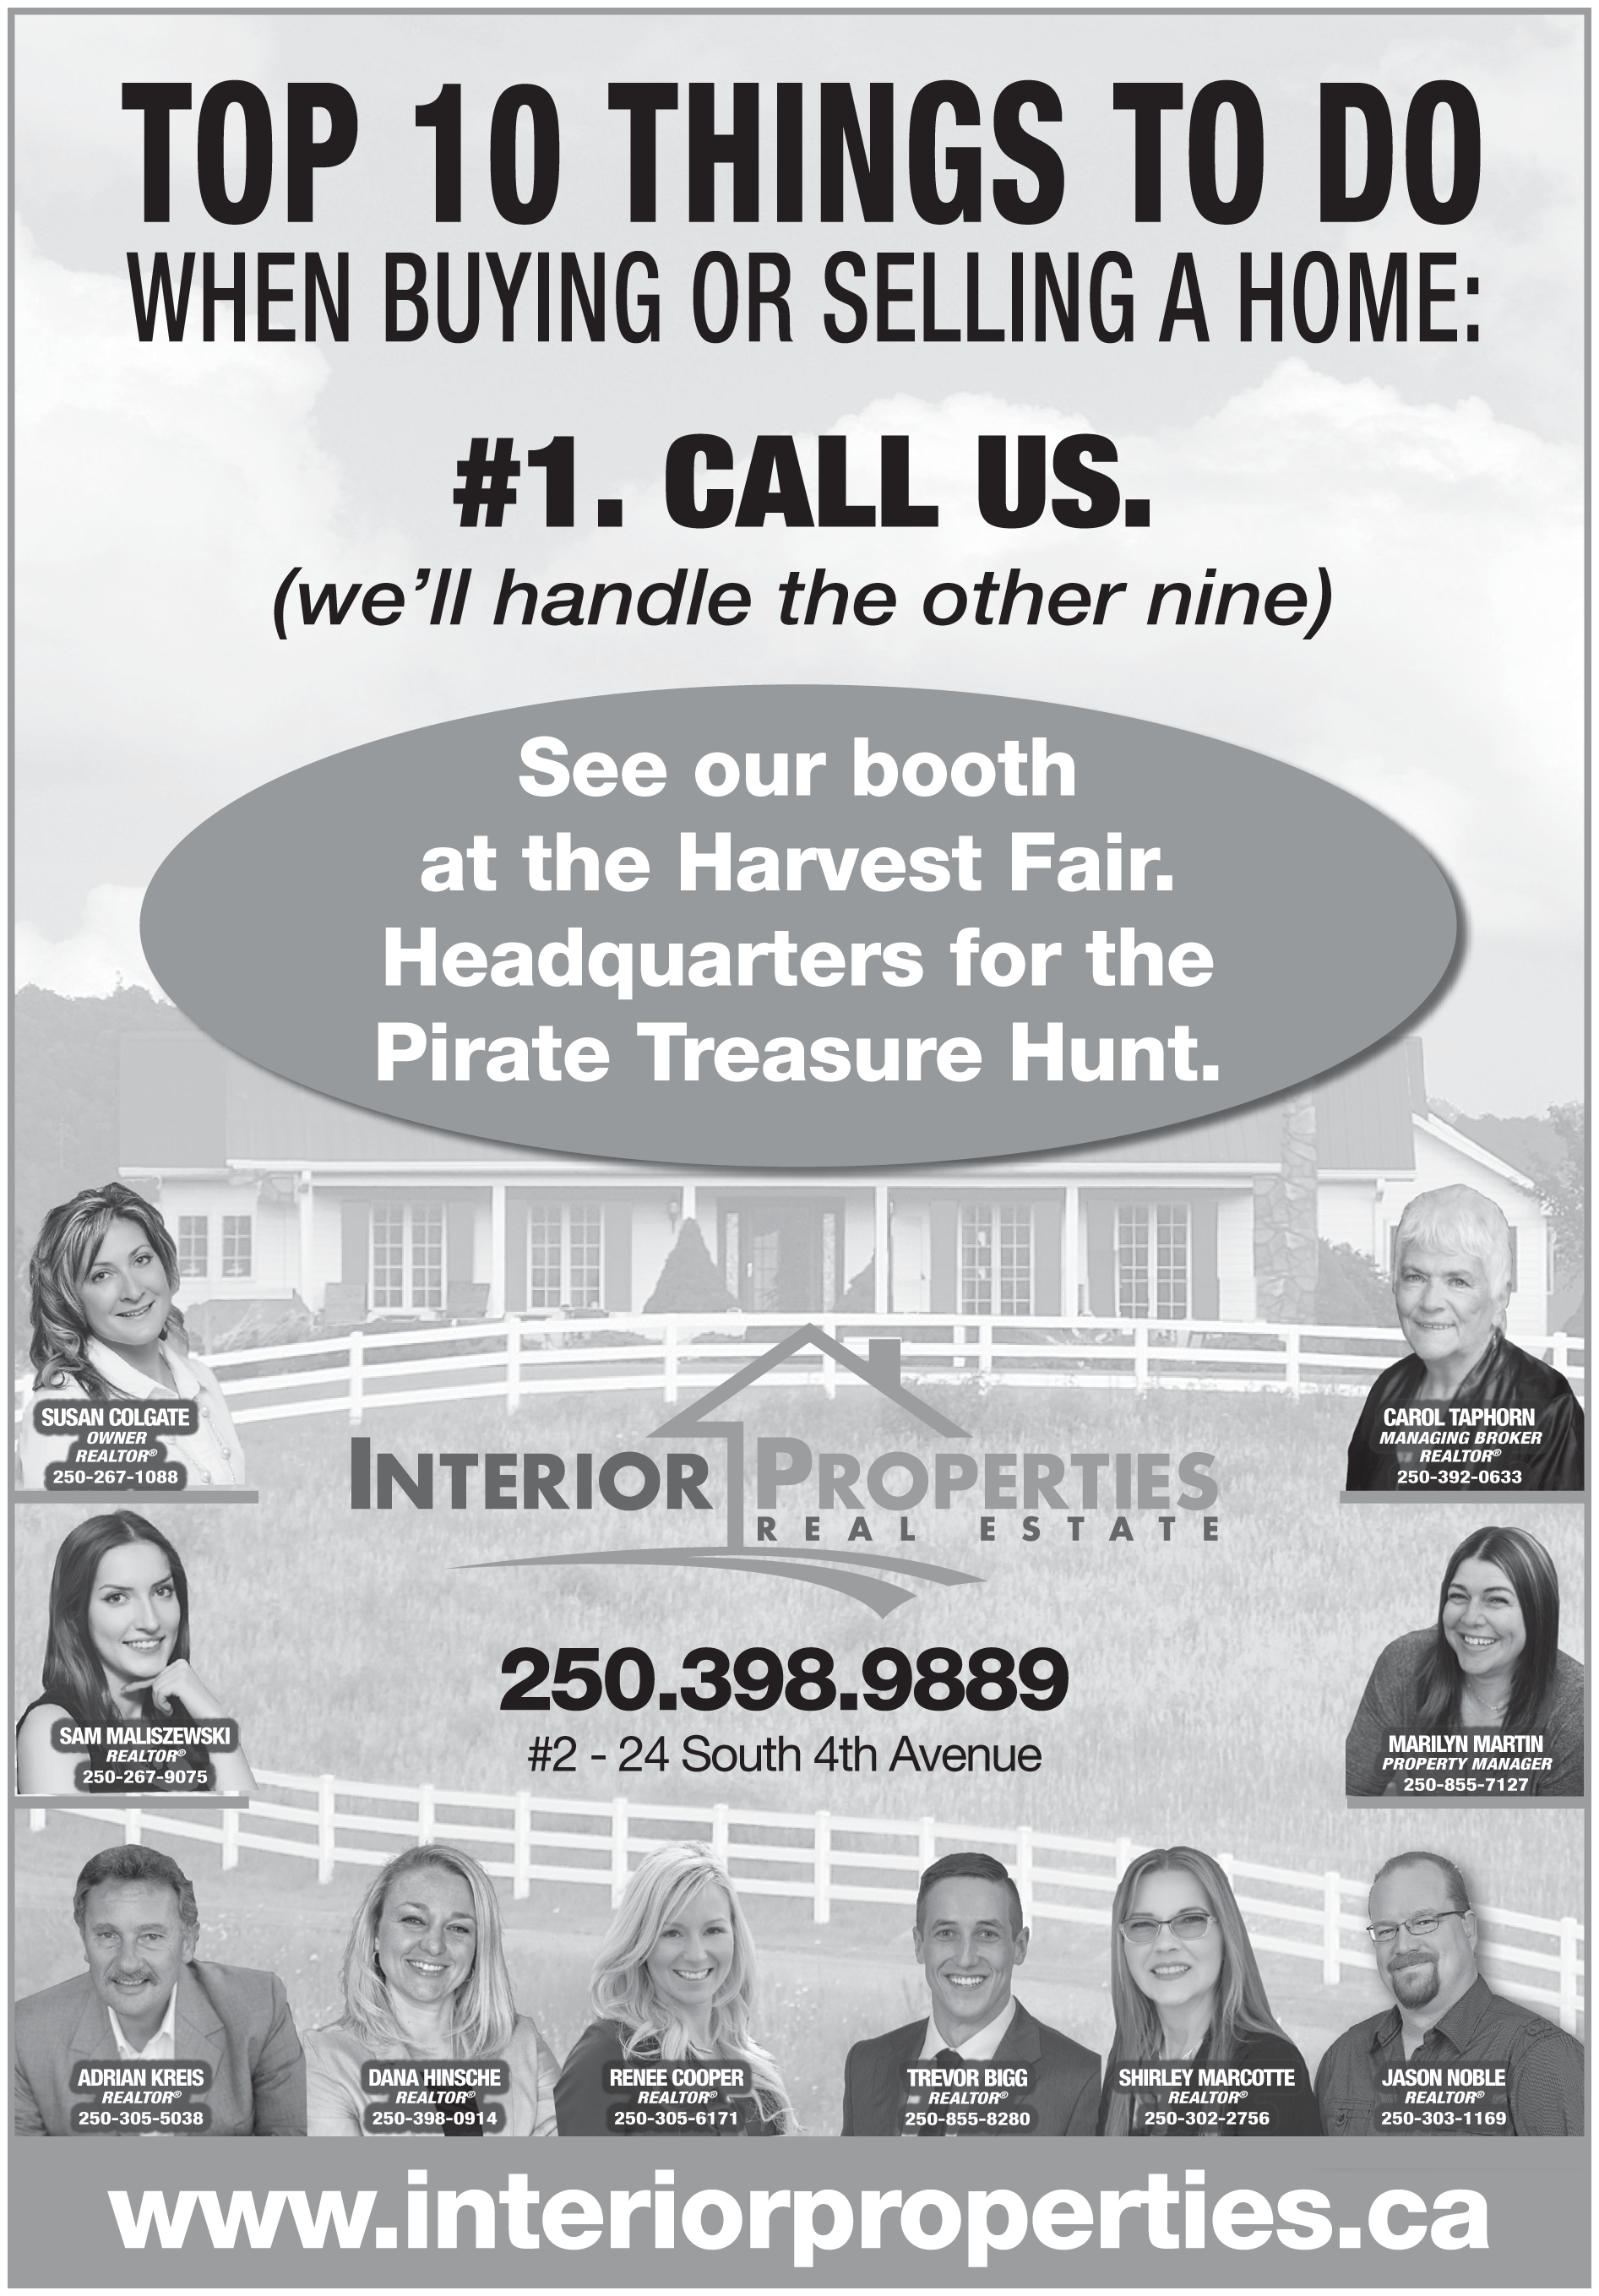 Please take a moment to visit our wonderful sponsors, Interior Properties Real Estate.  Click here.